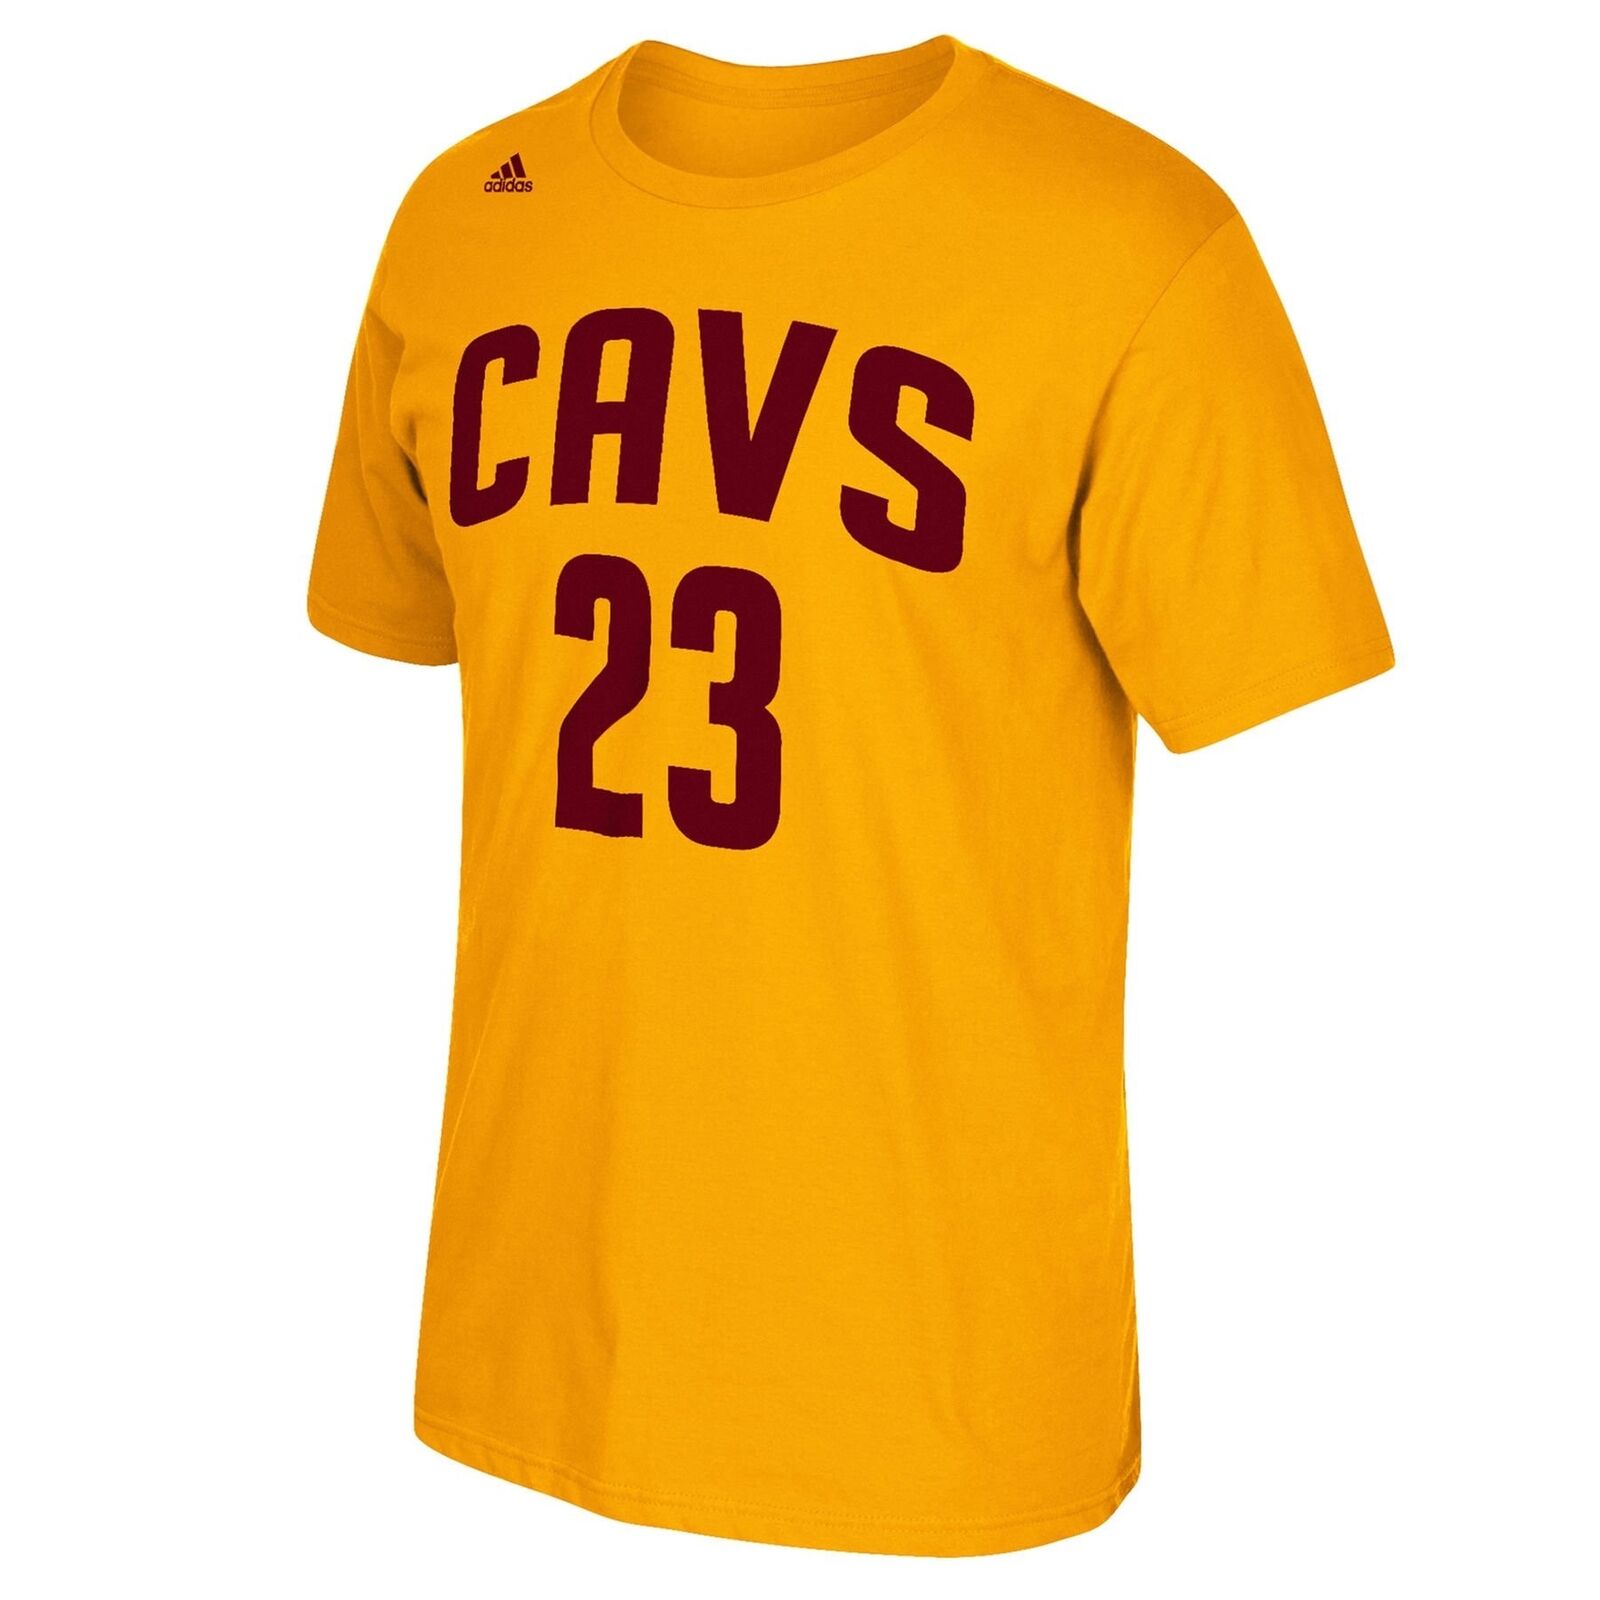 Cleveland Cavaliers #23 LeBron James White Name & Number T-Shirt